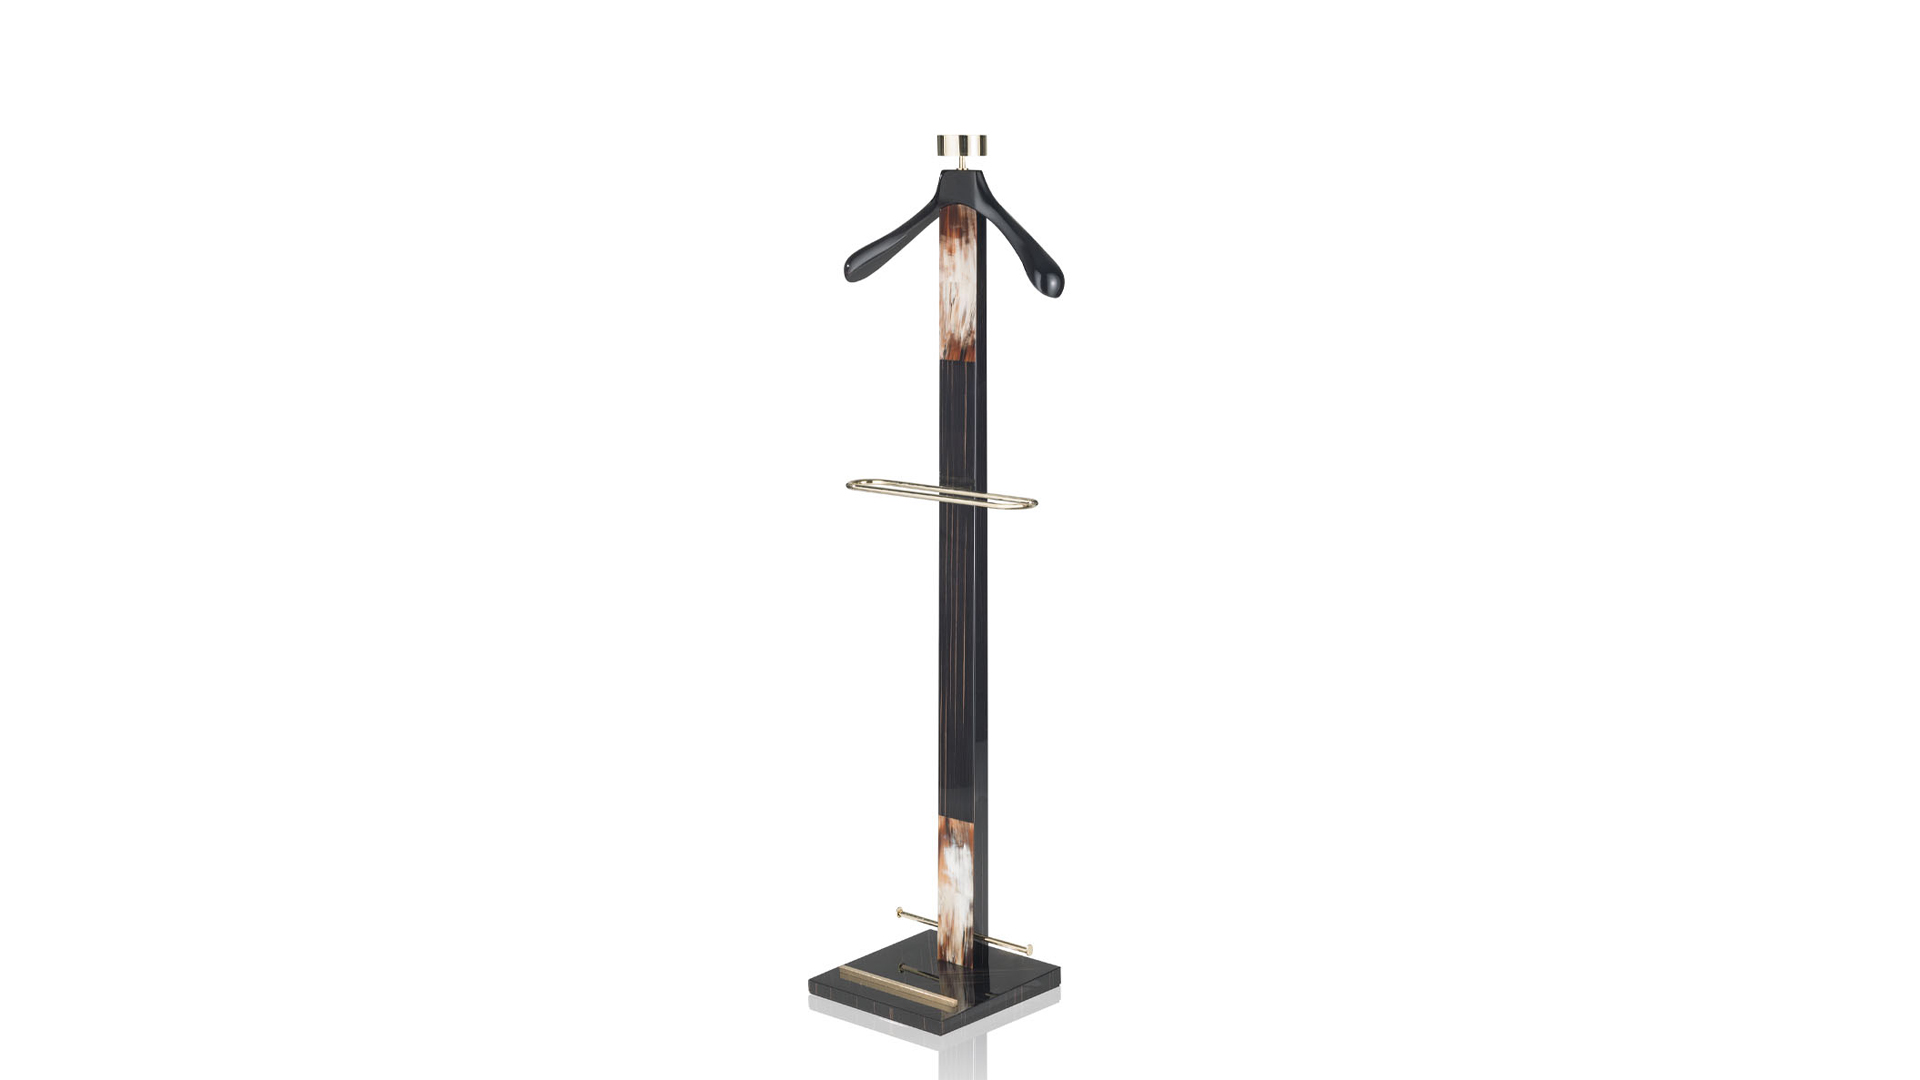 Coat stands and complementary furniture - Levanzo wardrobe valet in horn and glossy ebony - cover - Arcahorn